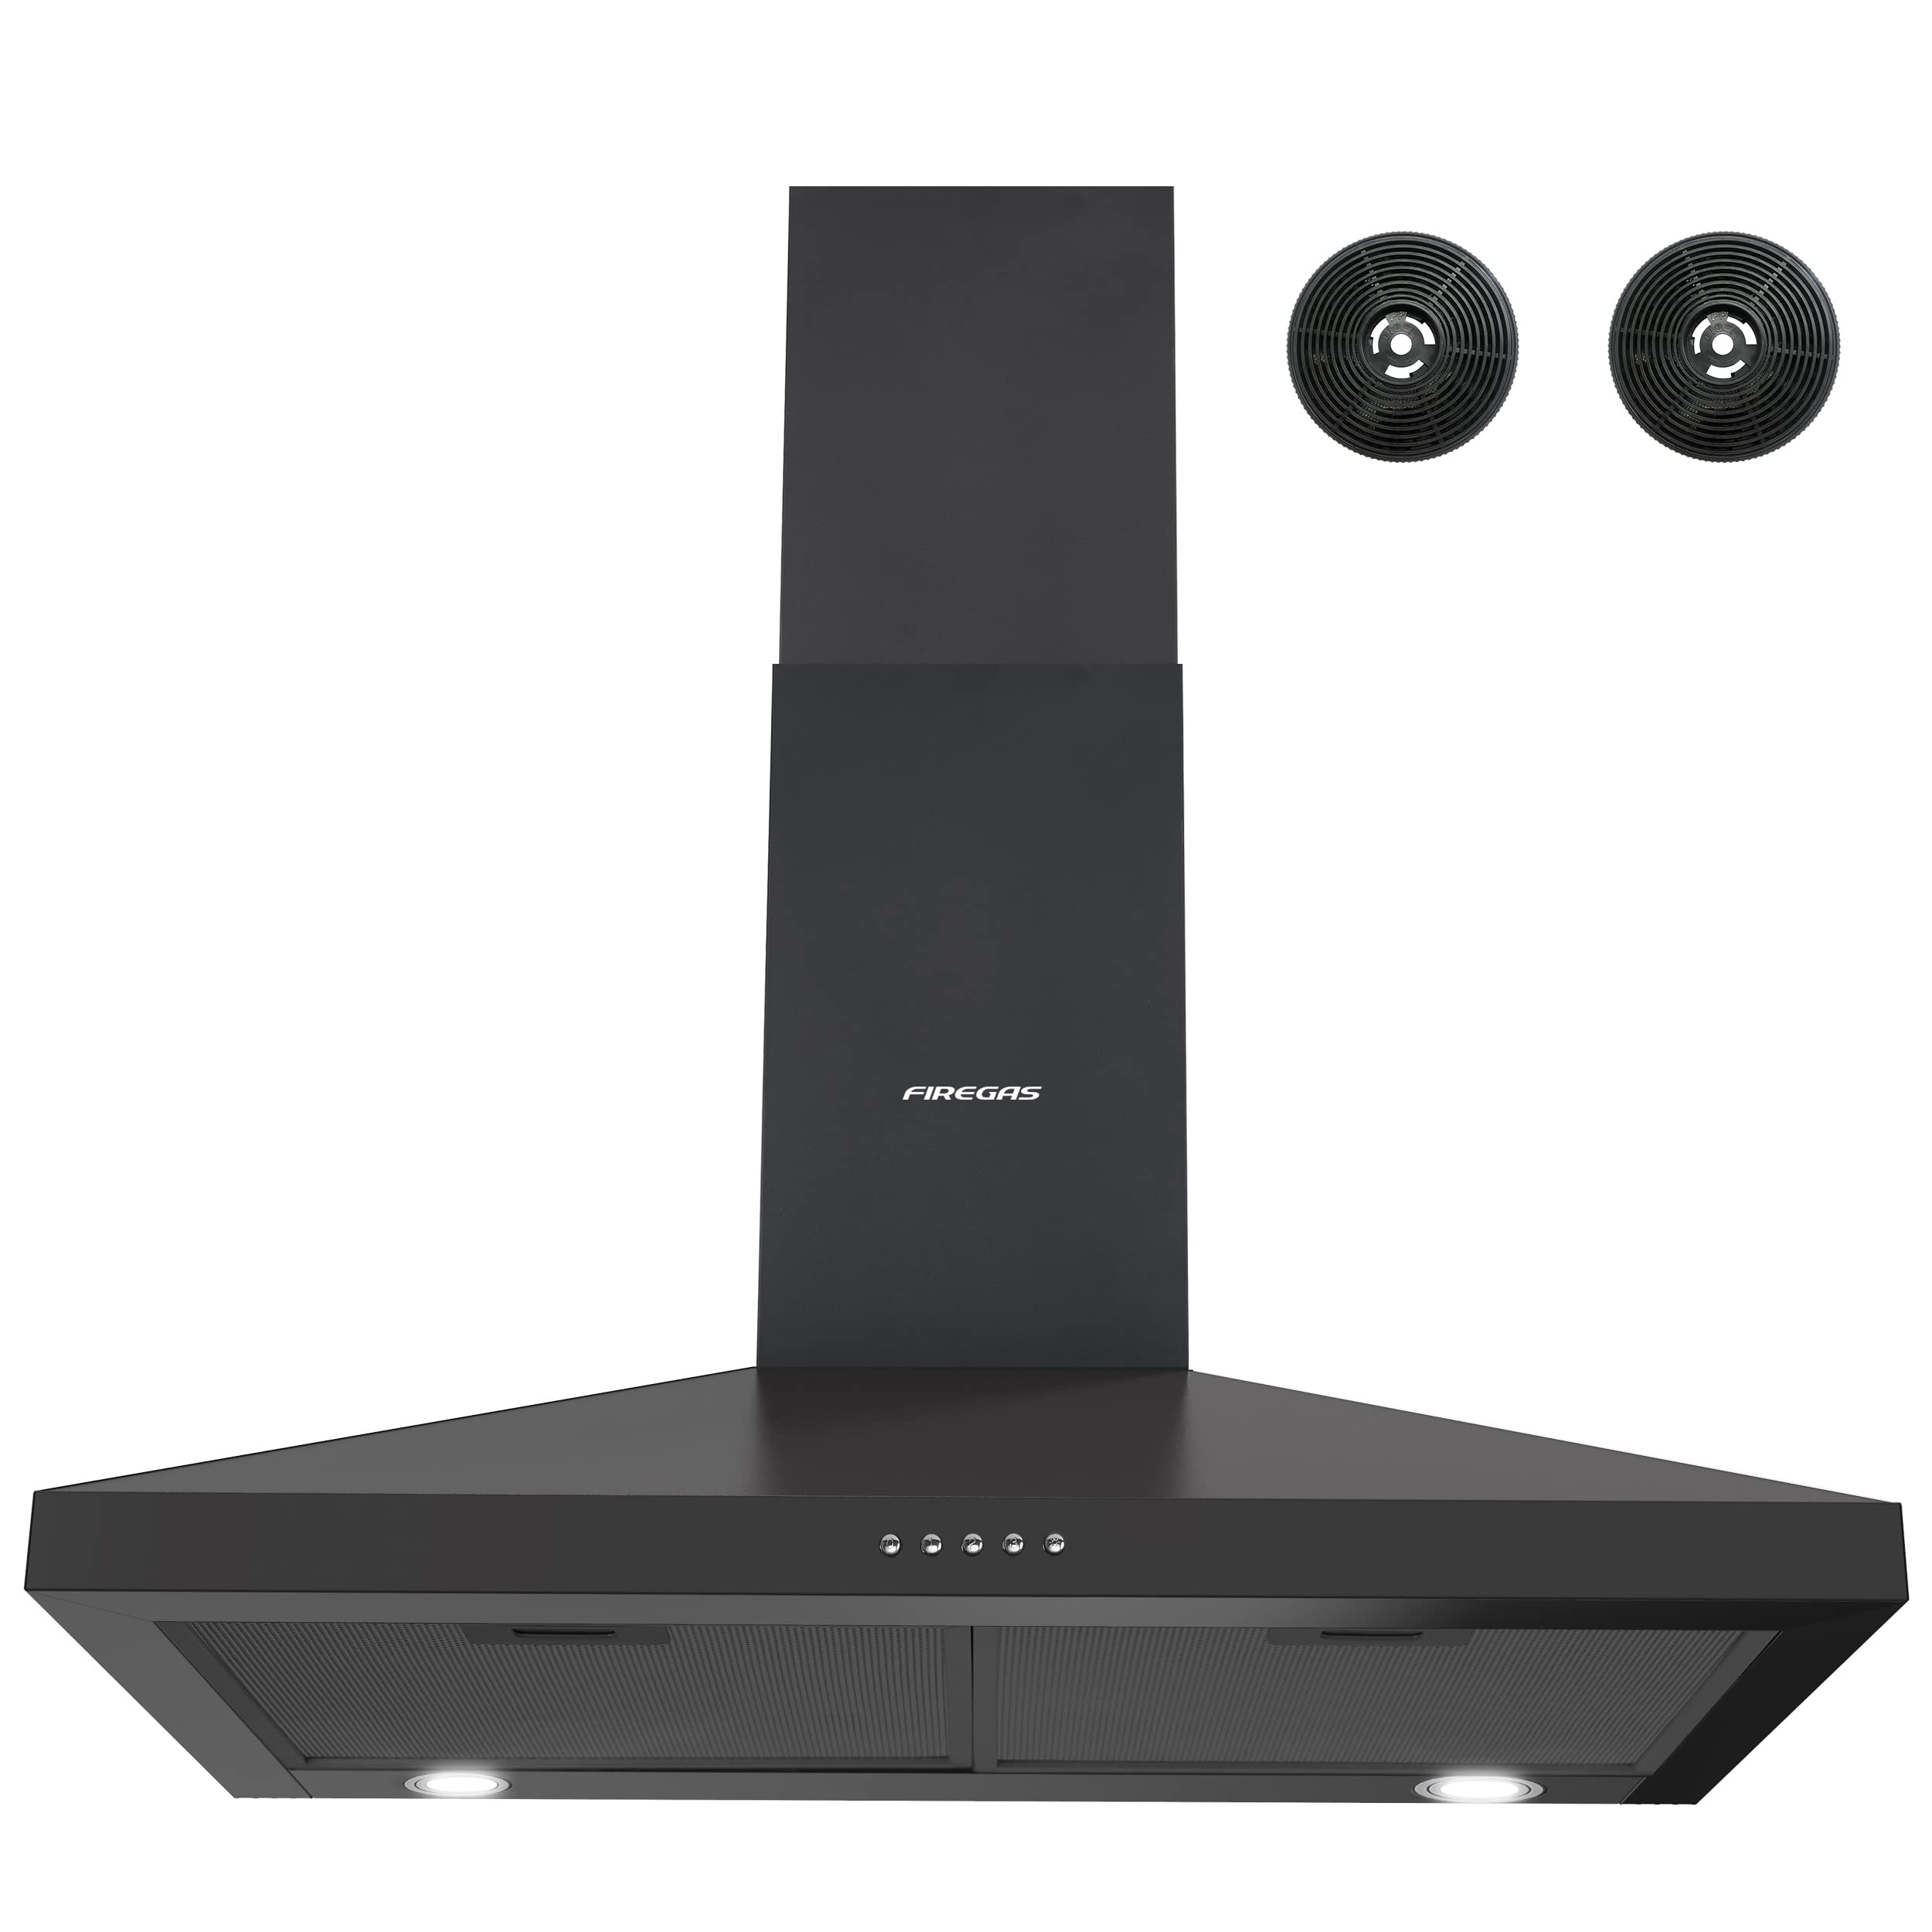 Firegas Range Hood 30 inch,Wall Mount Range Hood with Ductless Convertible Duct, Kitchen Chimney Style Over Stove Vent, 3 Speed Exhaust Fan, Permanent Filters, LED Lights in Stainless Steel